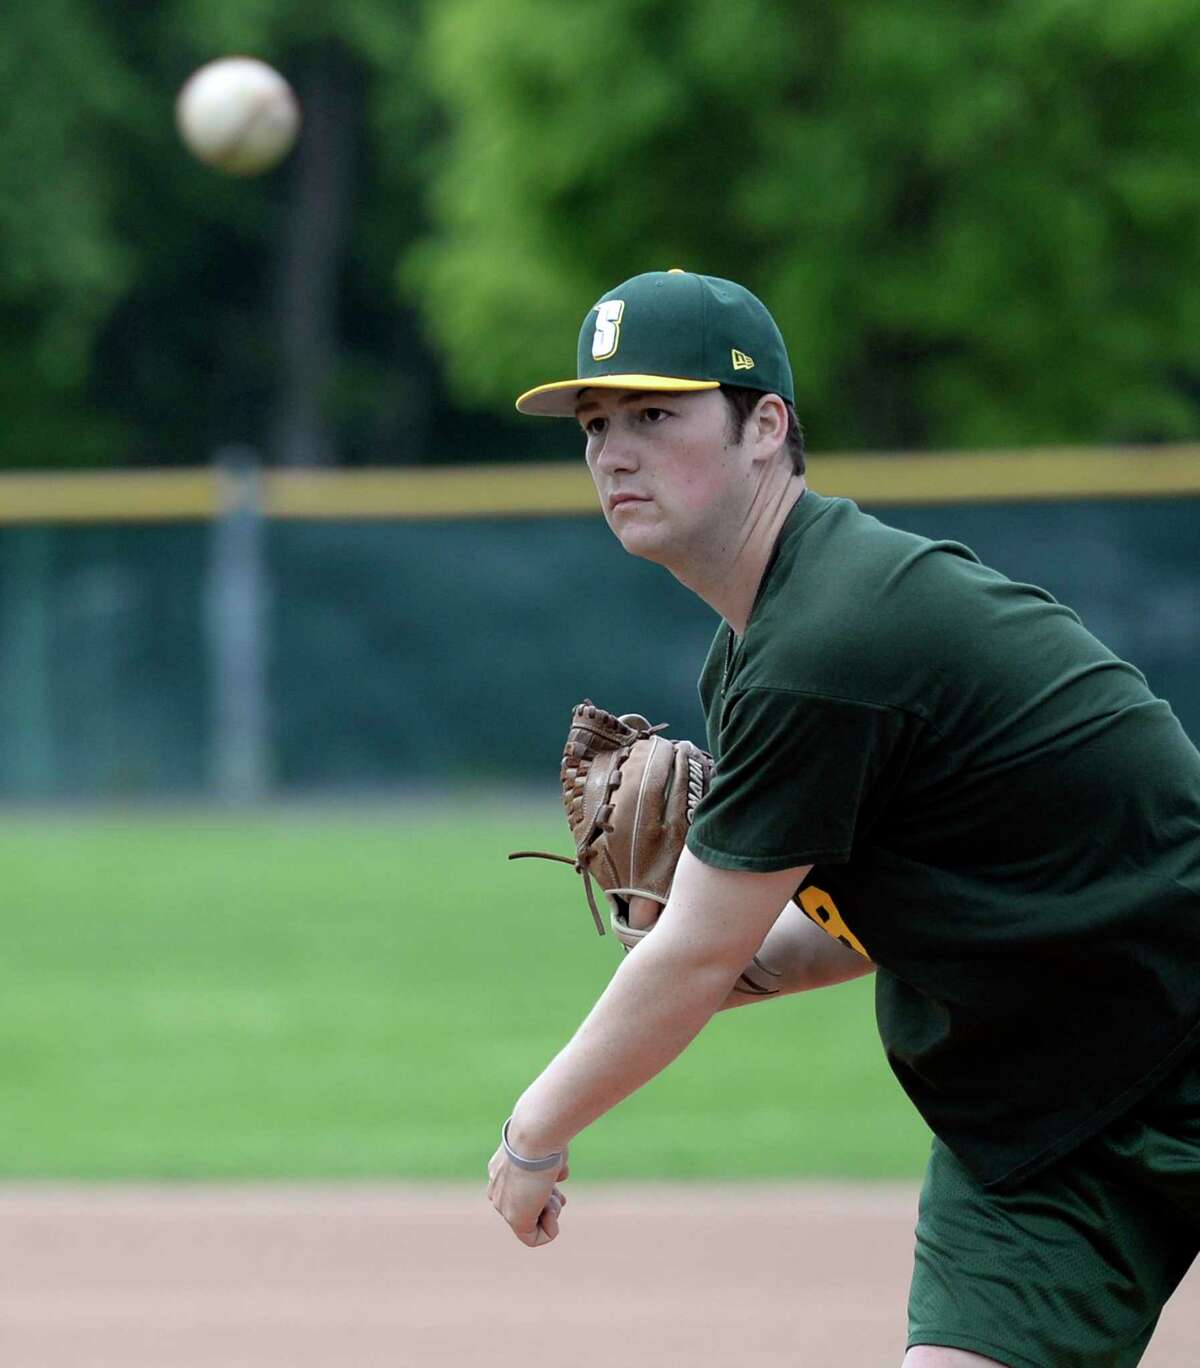 Pitcher Matt Gage throws some warm up pitches at the Siena baseball facility Tuesday morning May 27, 2014 in Loudonville, N.Y. (Skip Dickstein / Times Union)